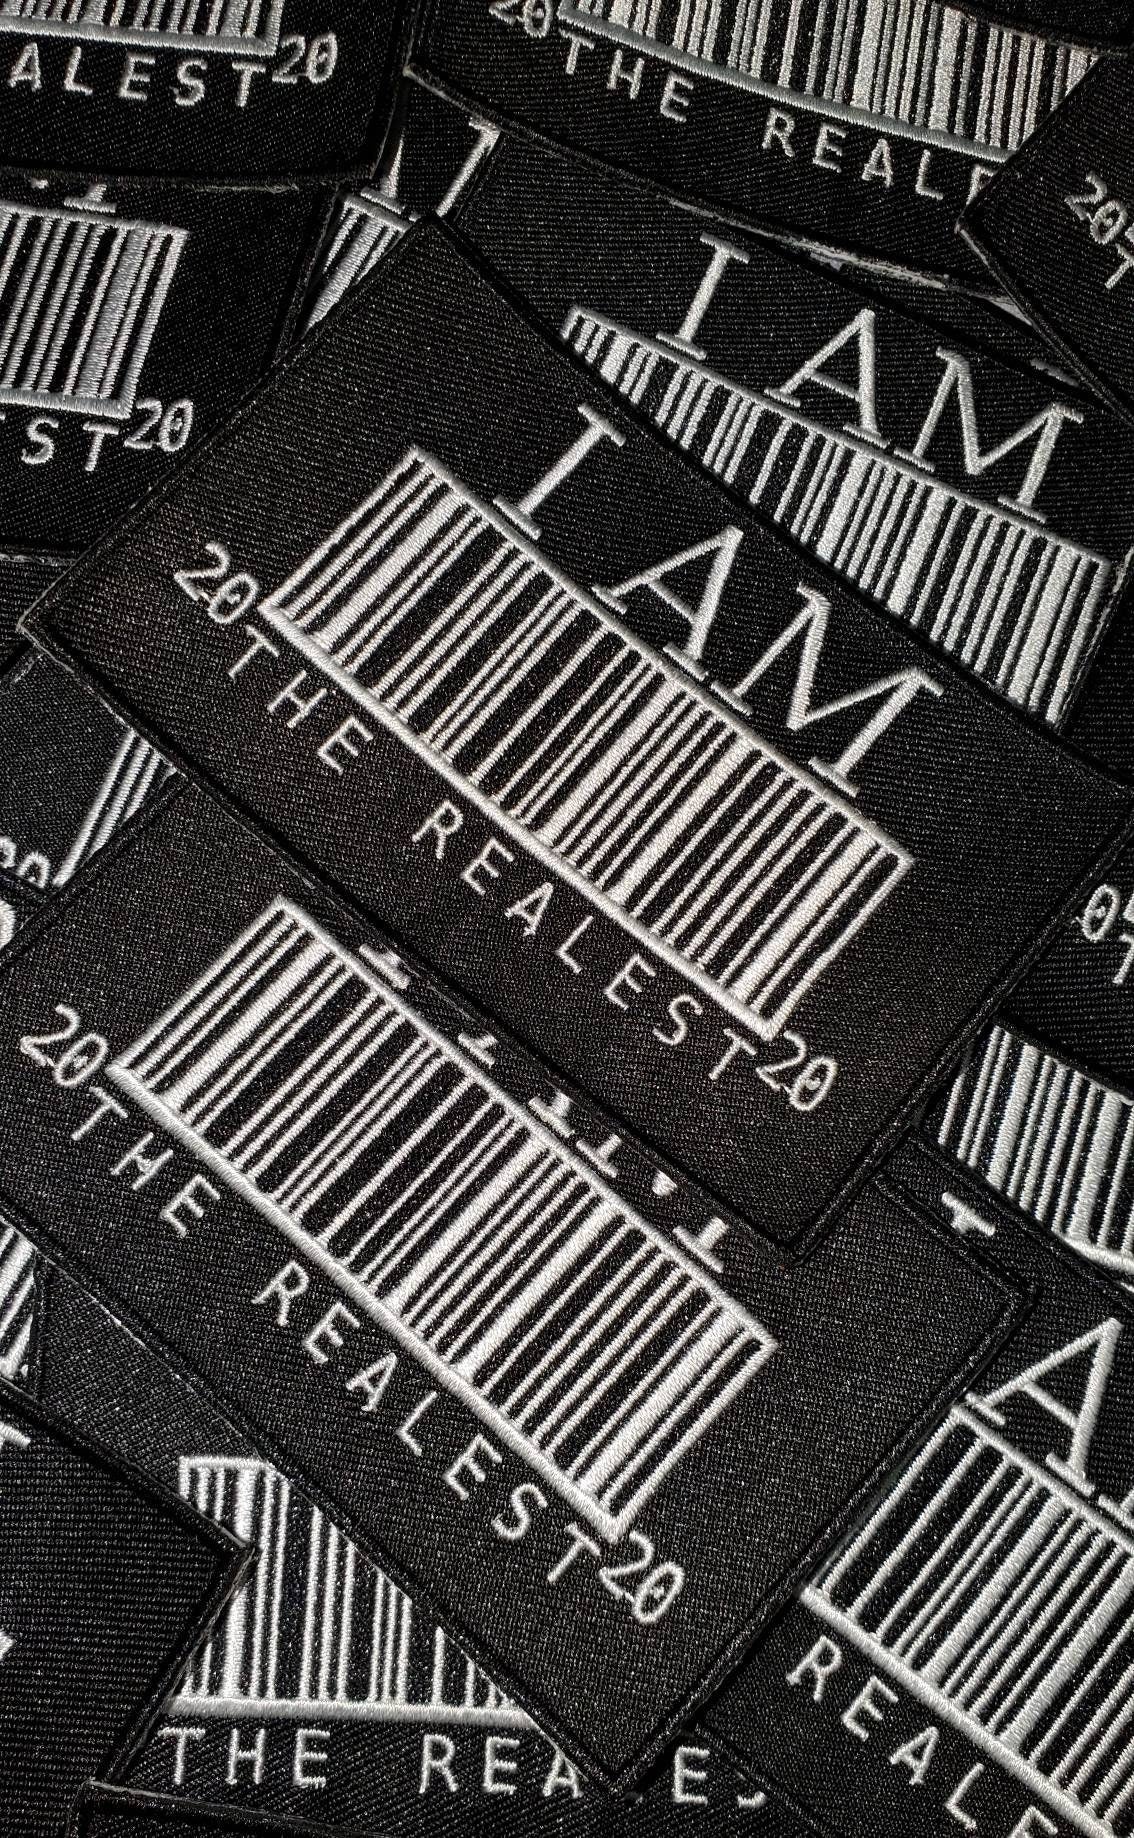 New Arrival, "I Am the Realest 20|20" Patch with Barcode, Iron-On Embroidered Applique; Patch for Clothing, Size 4"x3", Black & White Patch